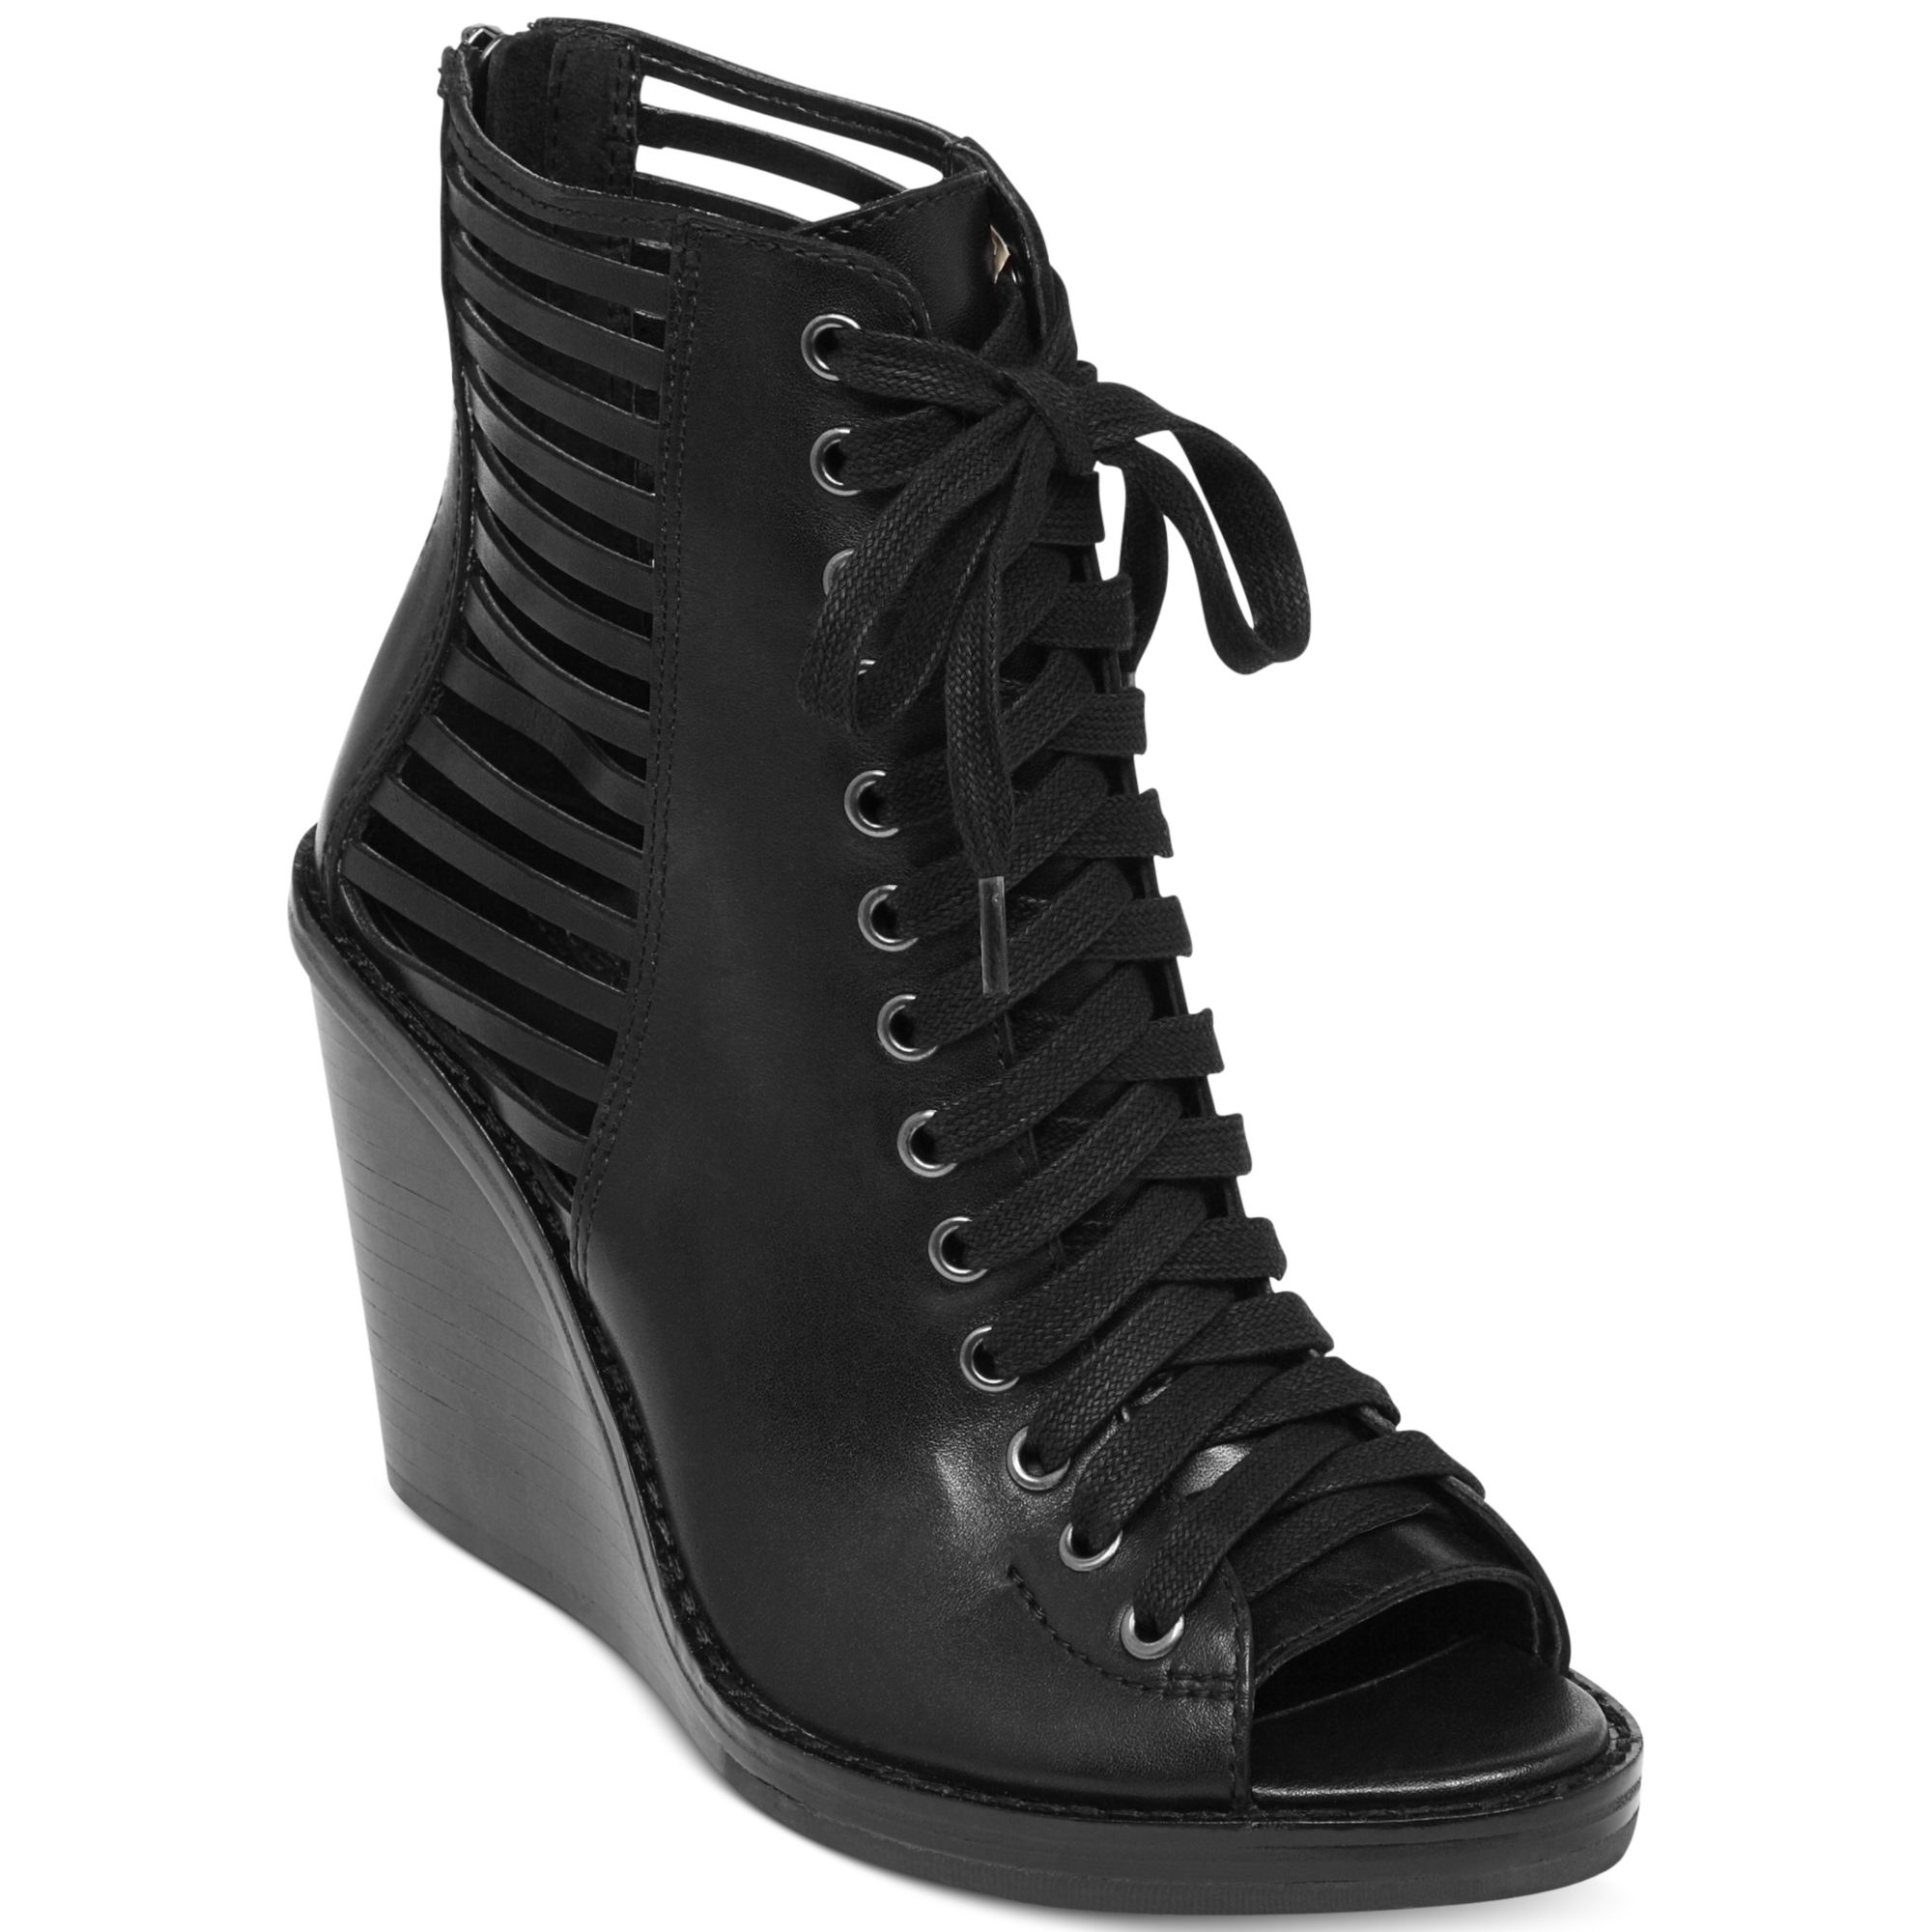 Lyst - Bcbgeneration Malbon Lace Up Wedge Booties in Black